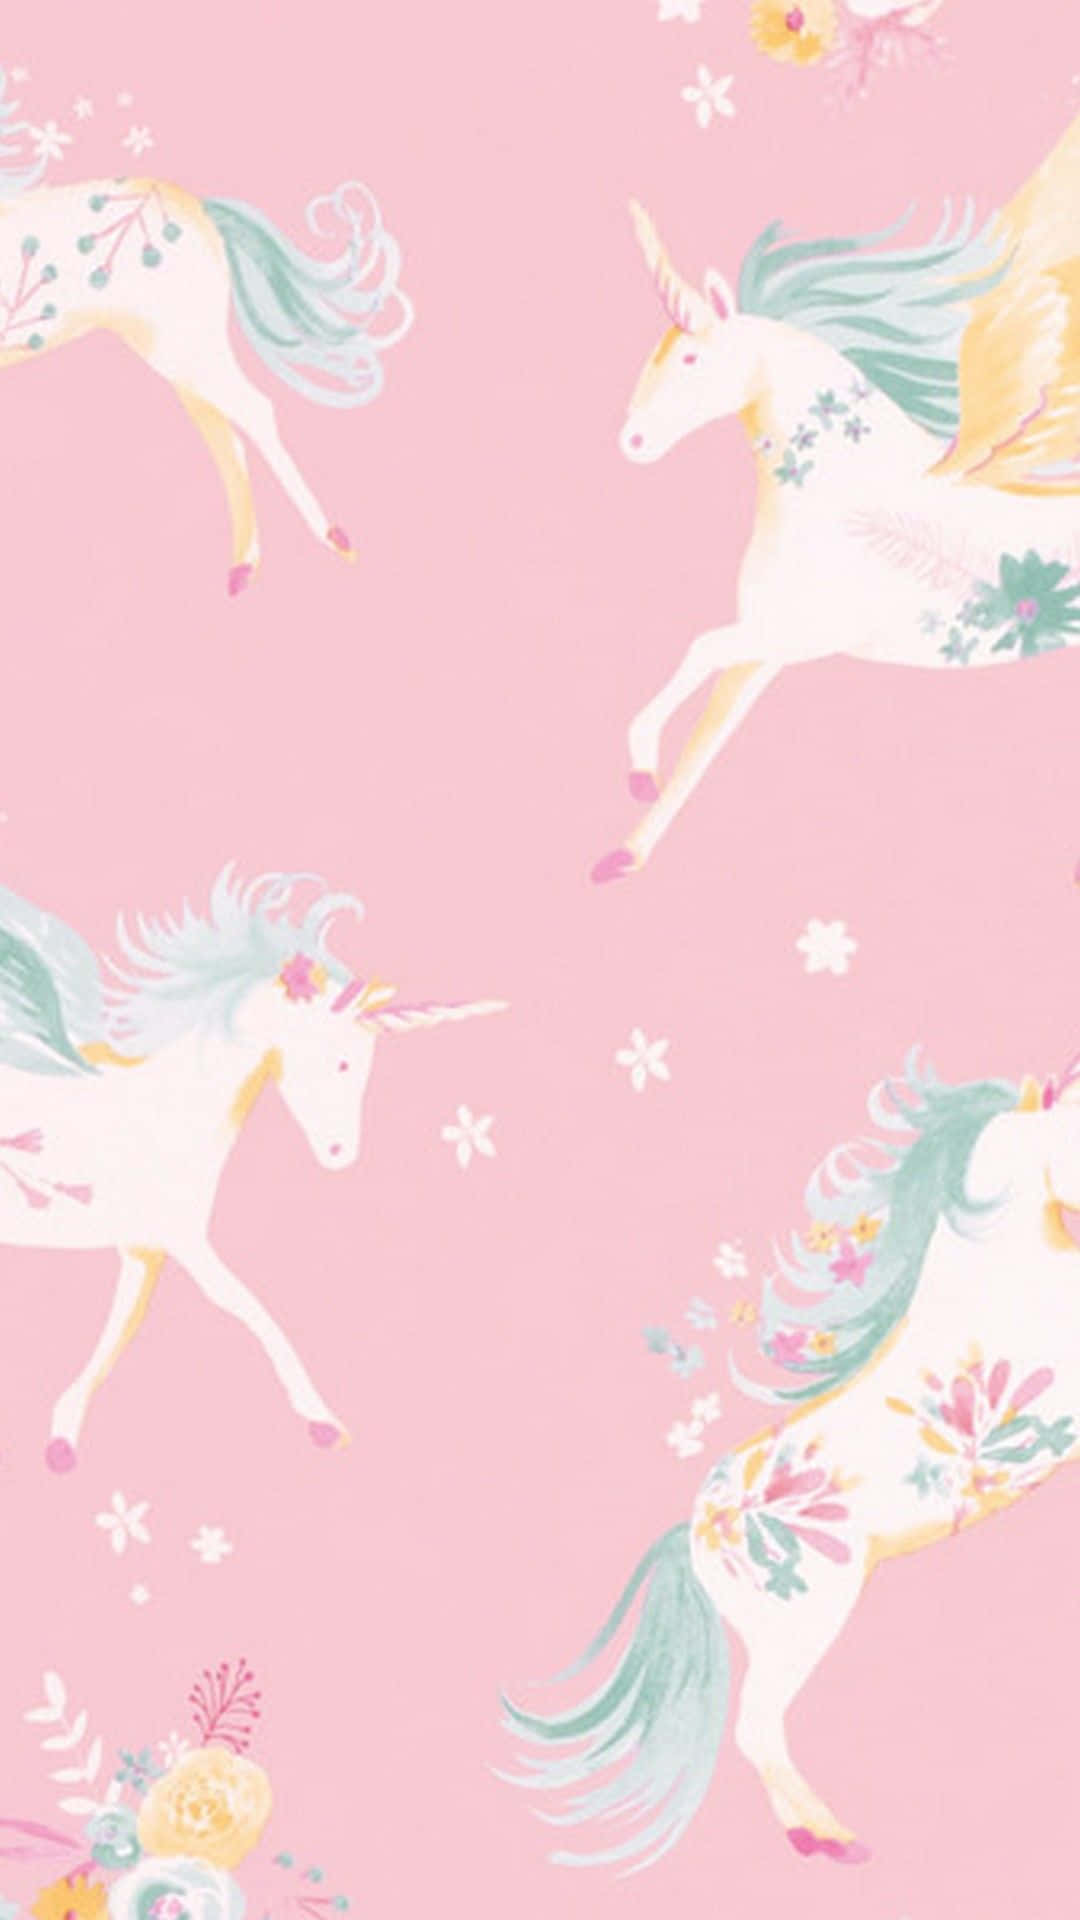 Welcome To The Magical Kingdom Of Unicorn Aesthetics Wallpaper